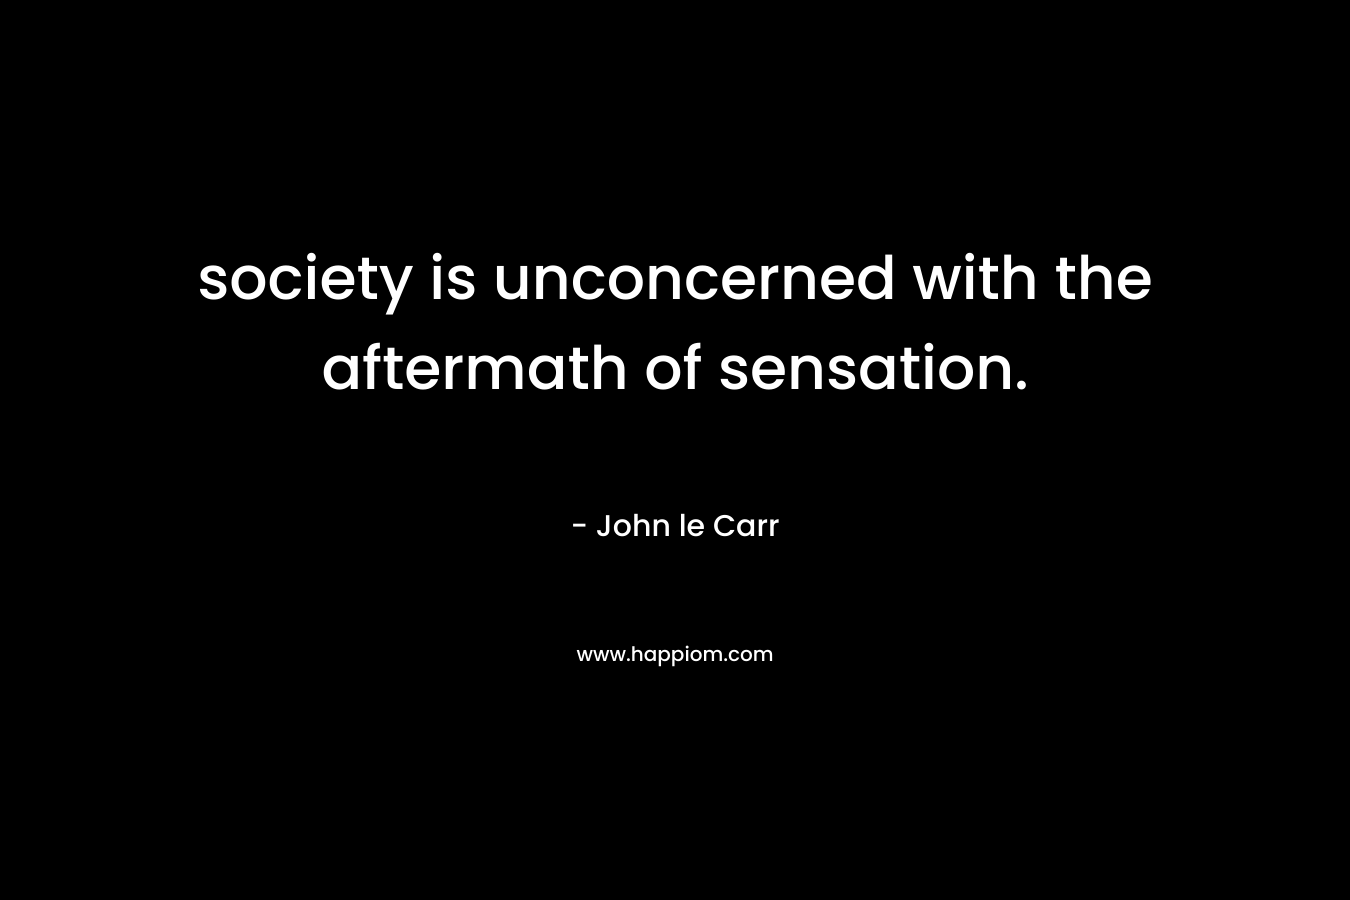 society is unconcerned with the aftermath of sensation.